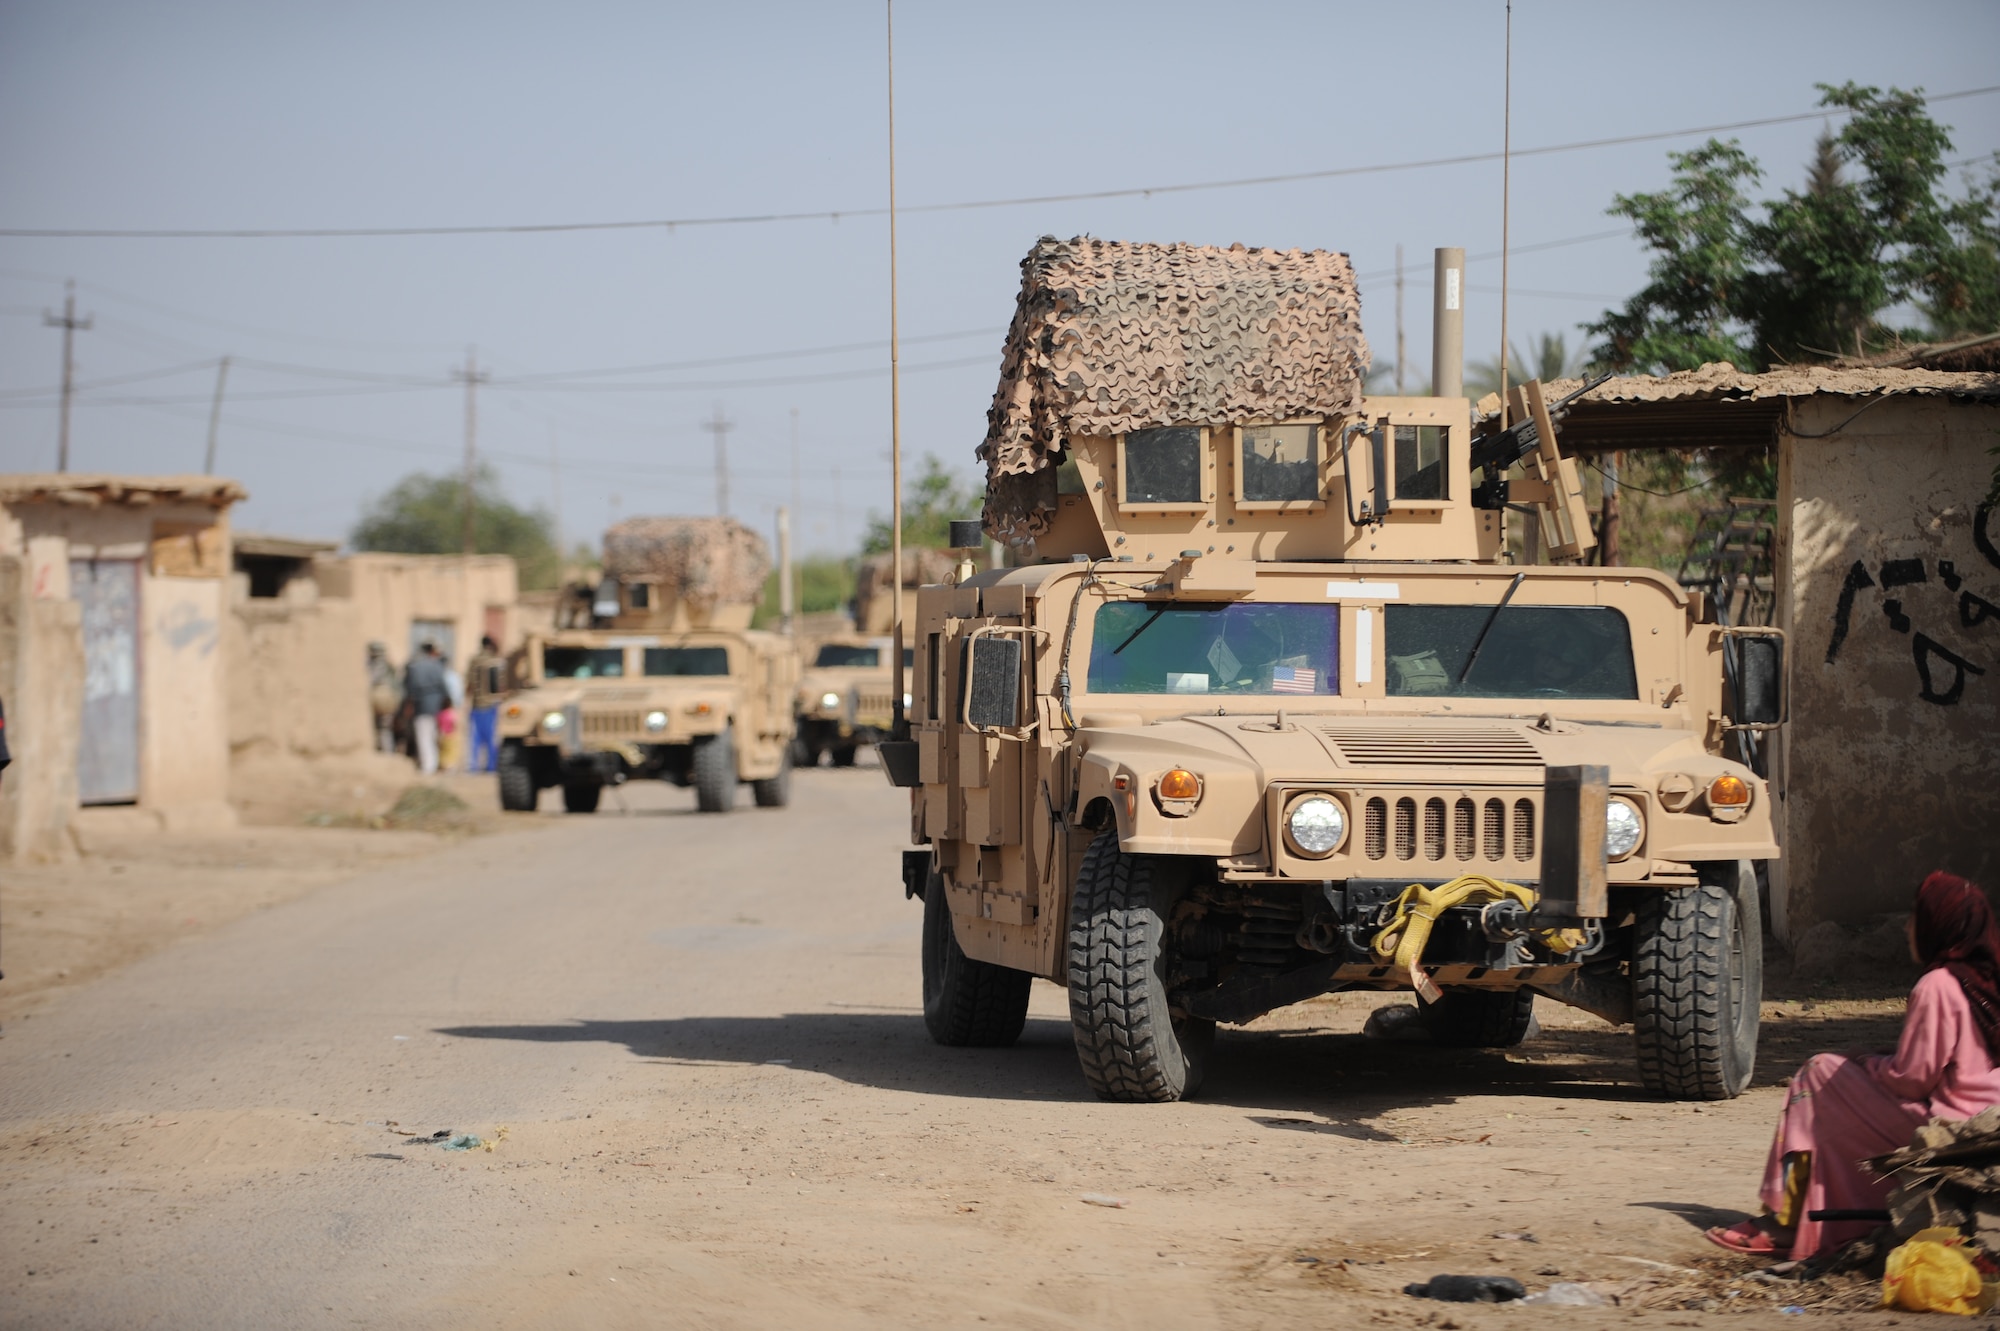 Humvee's from the 532nd Expeditionary Security Forces Squadron, Joint Base Balad, Iraq, conduct security during a patrol in the village of Abo Atei April 9, 2009, in support of Operation Iraqi Freedom.  (U.S. Air Force photo by Staff Sgt. James L. Harper Jr.)